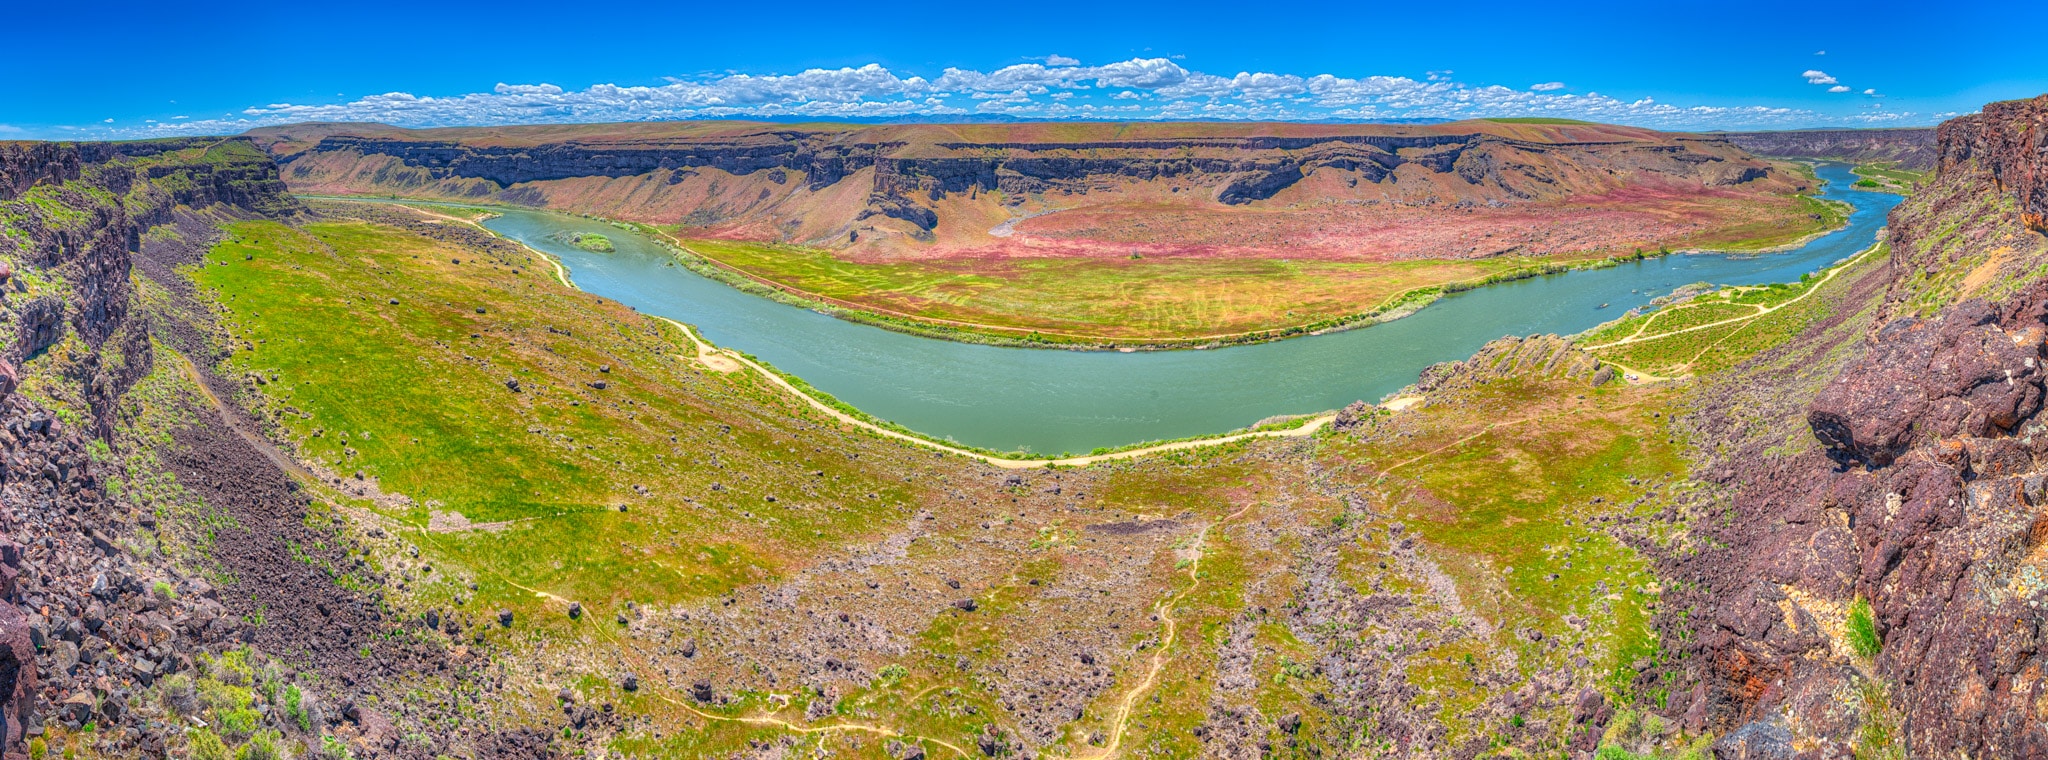 A panorama taken from Dedication Point Overlook in the Morley Nelson Snake River Birds of Prey National Conservation Area south of Boise, Idaho.